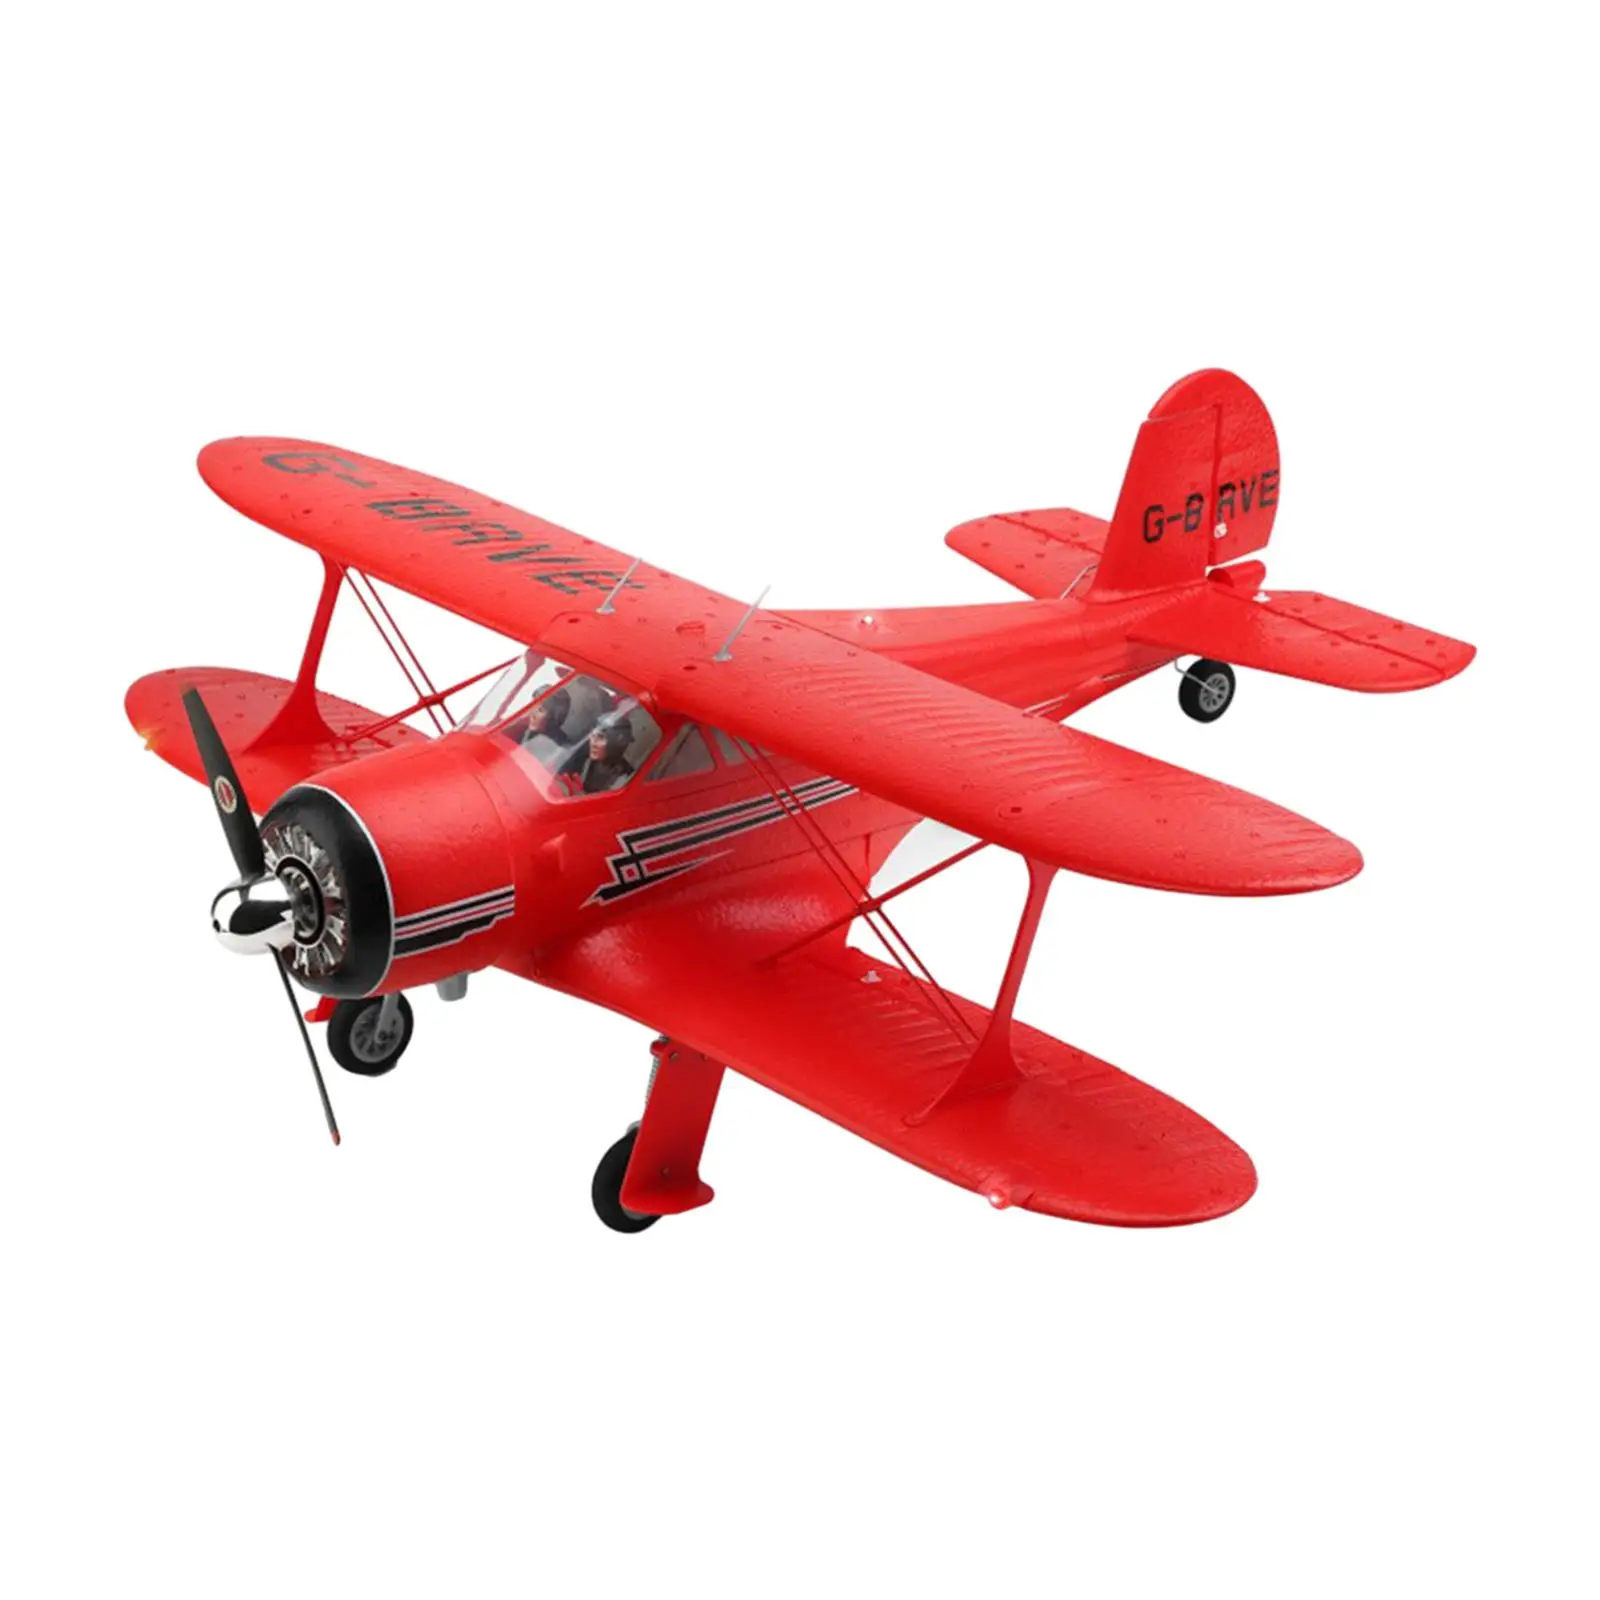 Wltoys A300 Beech D17S RC Plane 4 Channel EPP Biplane Remote Control Airplane Glider for Beginner Kids Adults Birthday Gifts